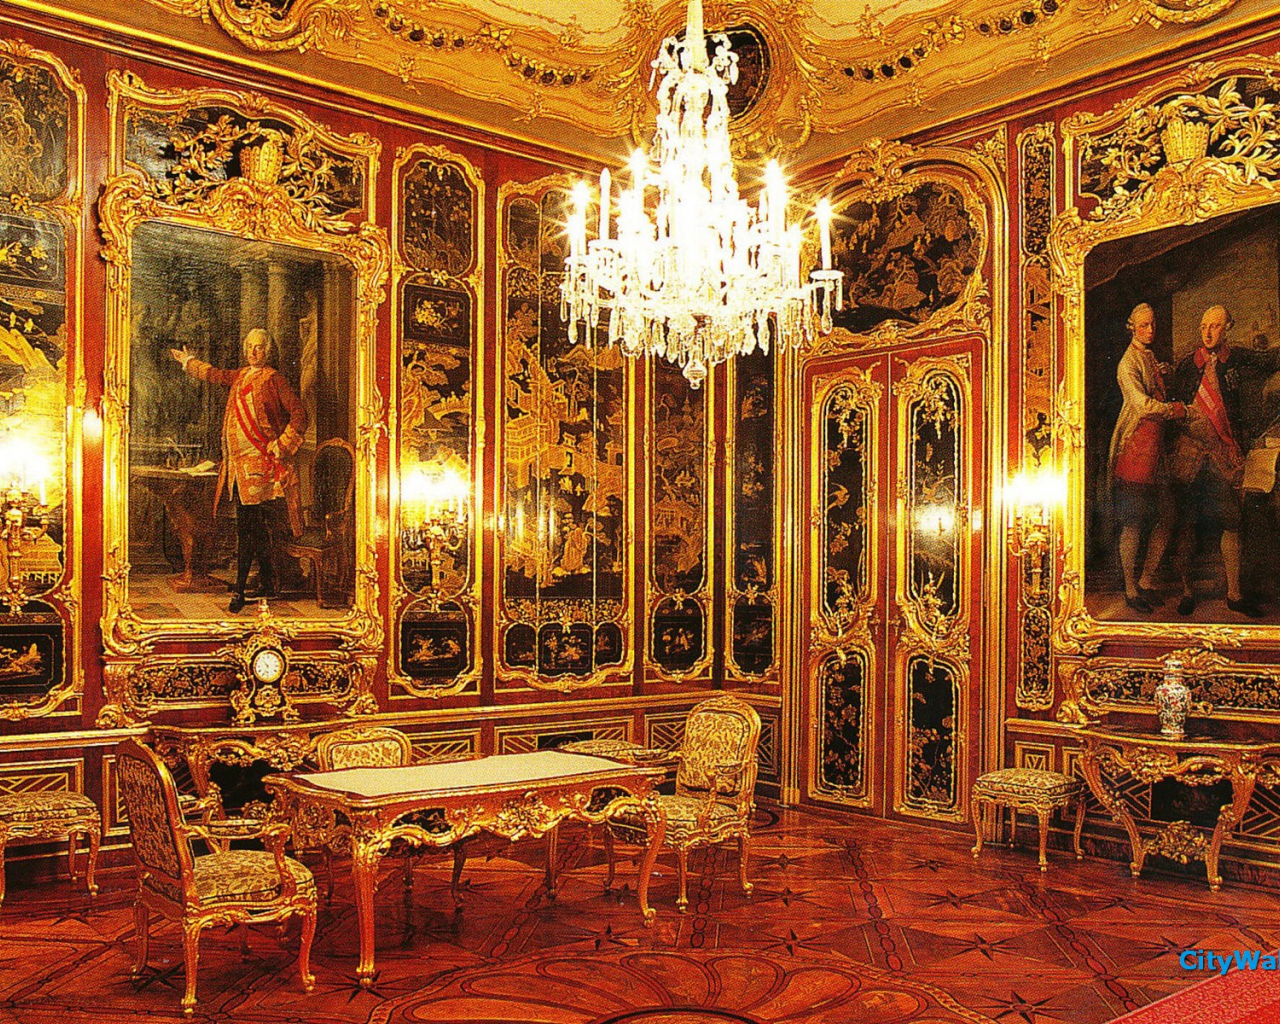 Free download Zoo York Schonbrunn Palace Interior 1129053 With Resolutions 1920 [1920x1200] for your Desktop, Mobile & Tablet. Explore Palace Clothing Wallpaper. Crystal Palace Wallpaper, Laura Ashley Summer Palace Wallpaper, Caravan Palace Wallpaper